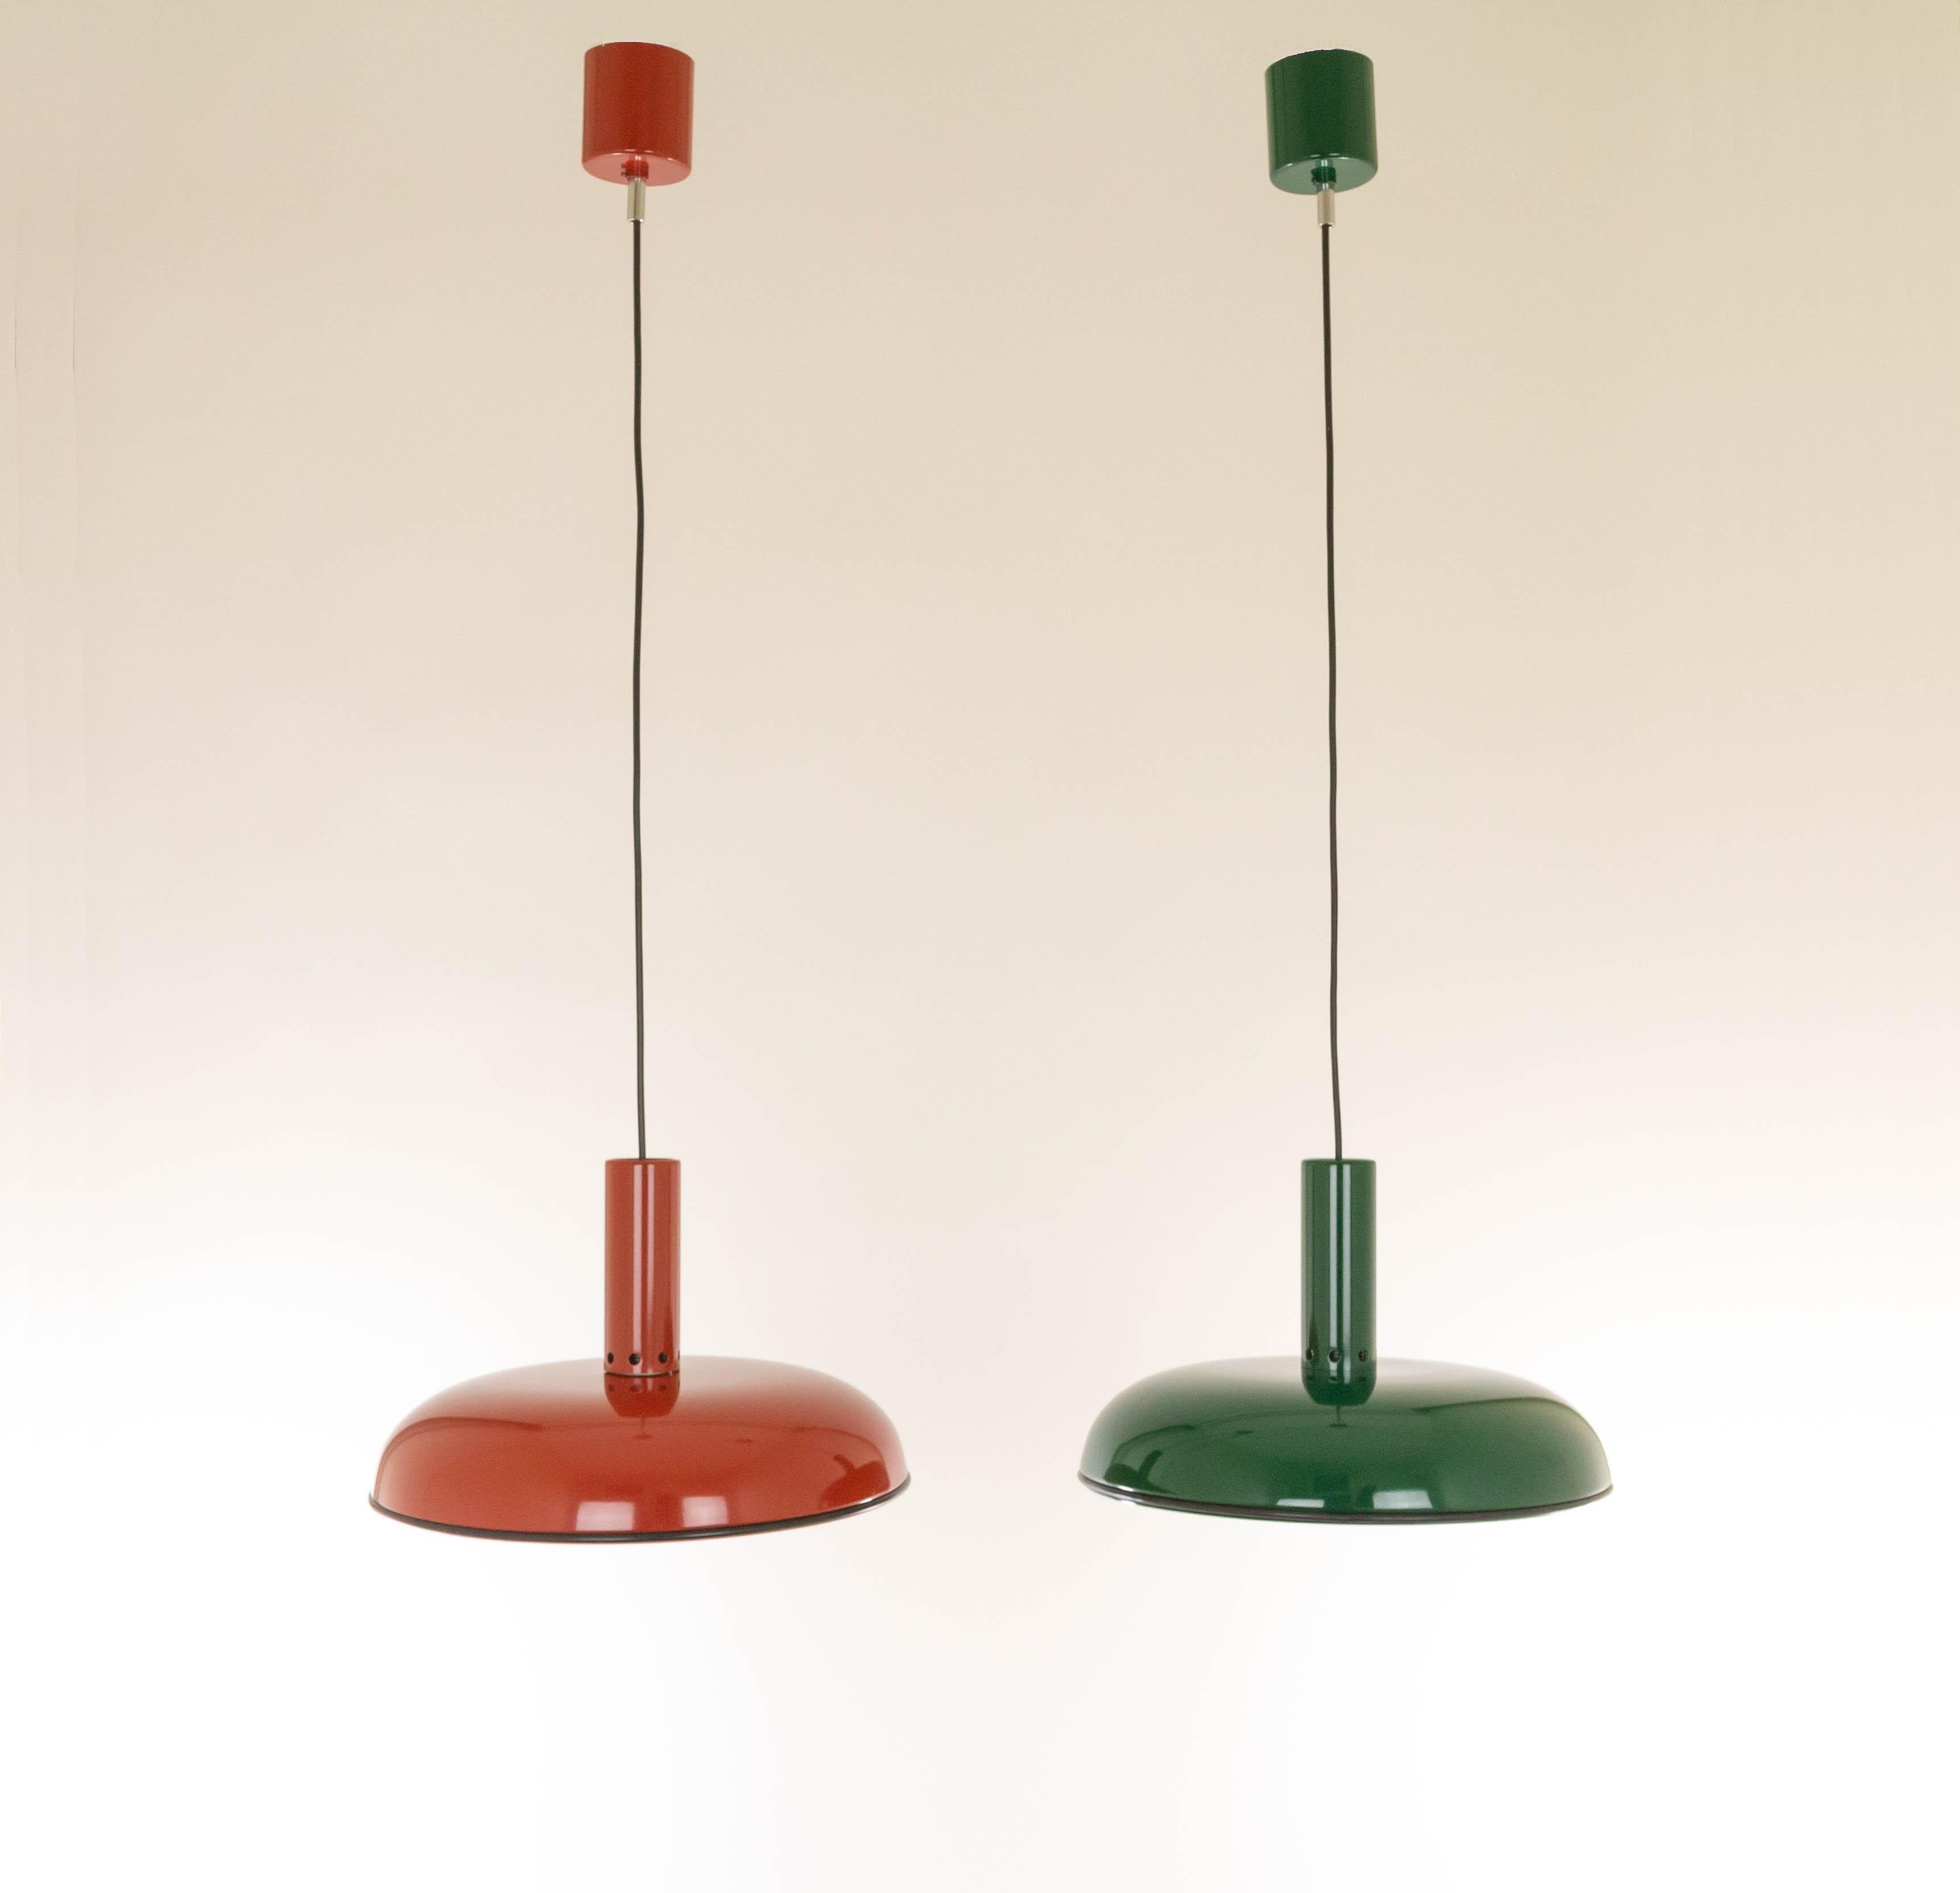 Pair of Iris pendants designed by Hiroyuki Tsugawa together with Studio Simon and manufactured by Sirrah in the 1980s.

The model consists of a metal shade with black rubber edge and a lightbulb holder. The ceiling cap is part of the